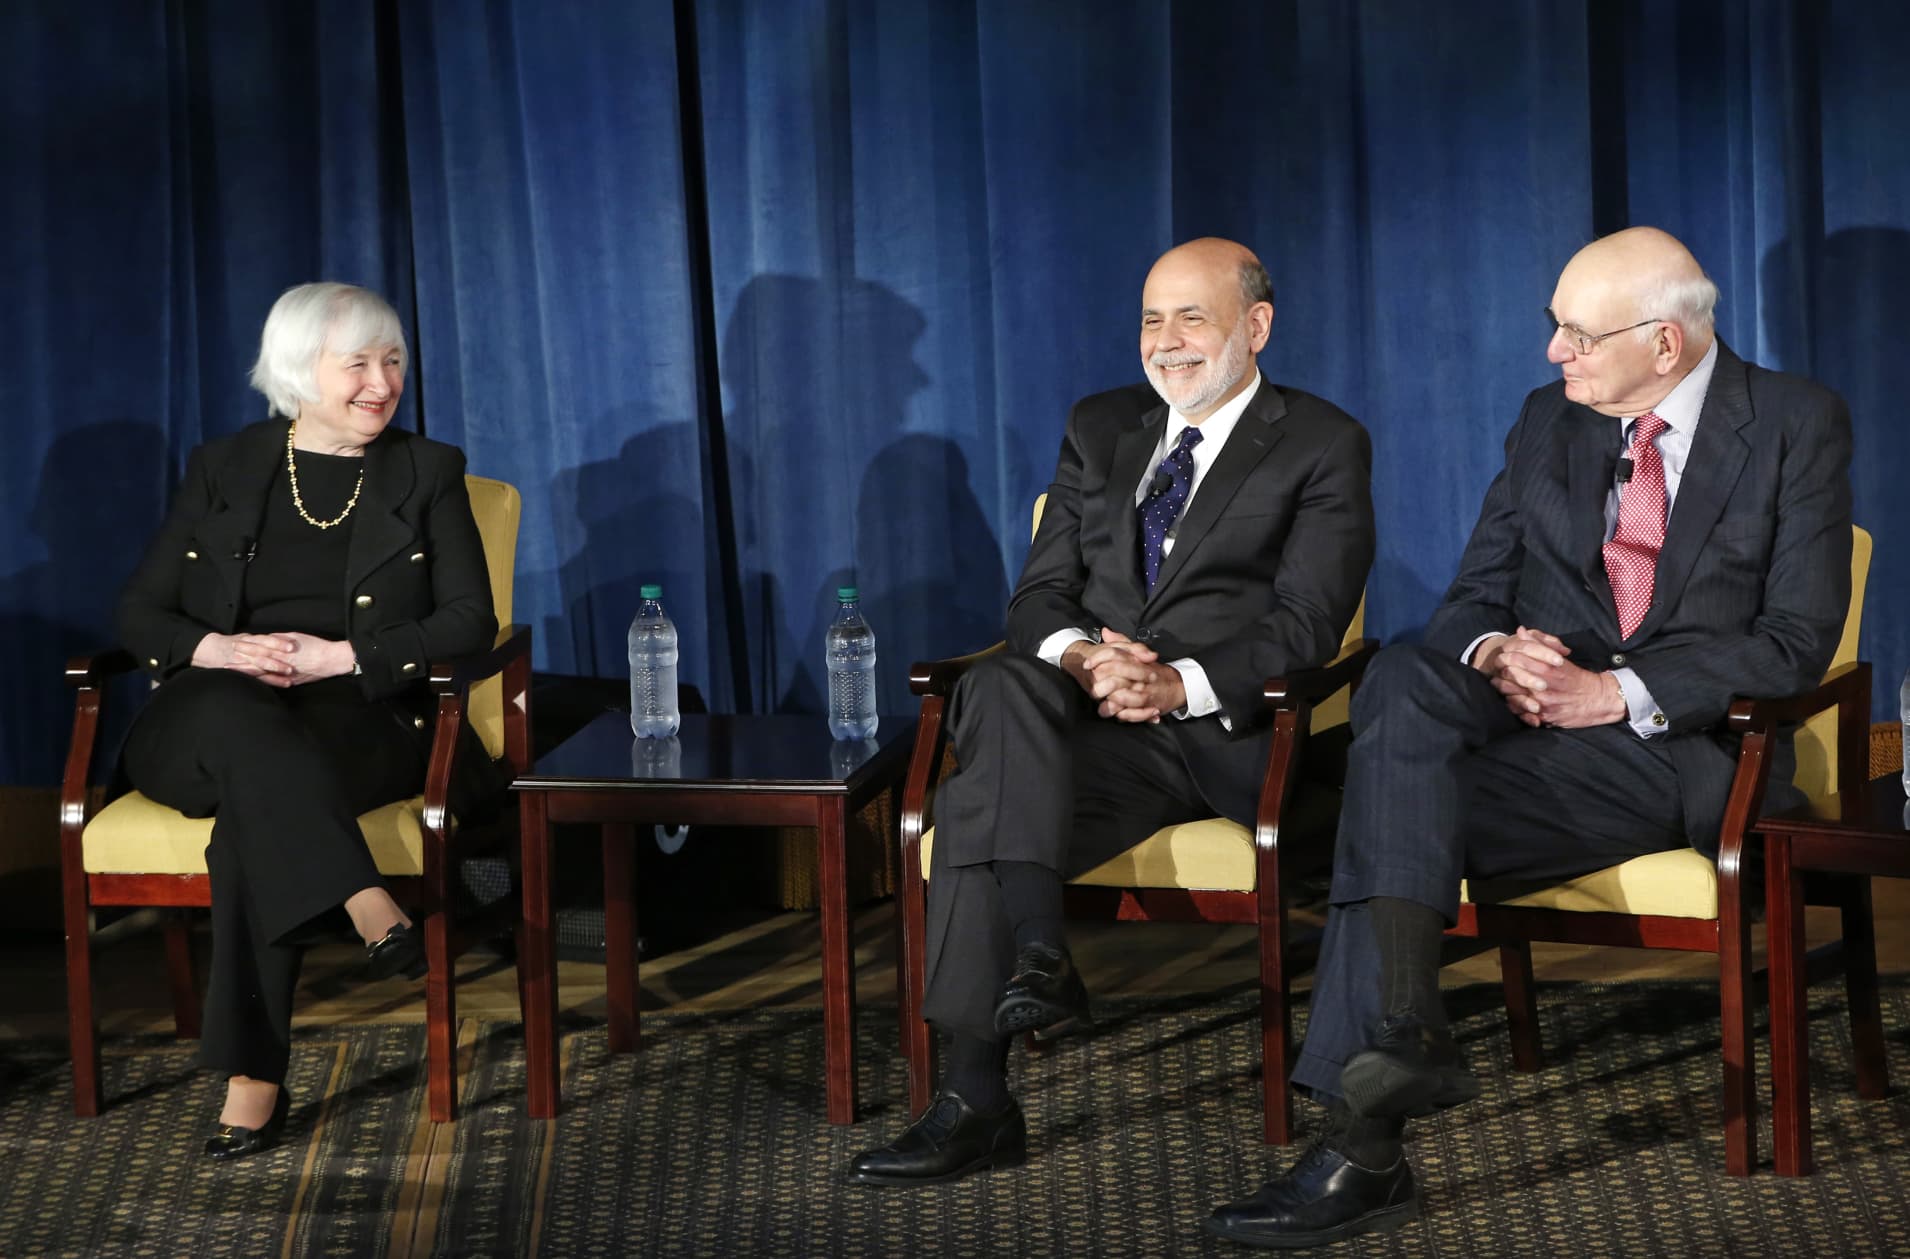 RT: Fed chair Janet Yellen (L to R) and former fed chairs Ben Bernanke and Paul Volcker 160407